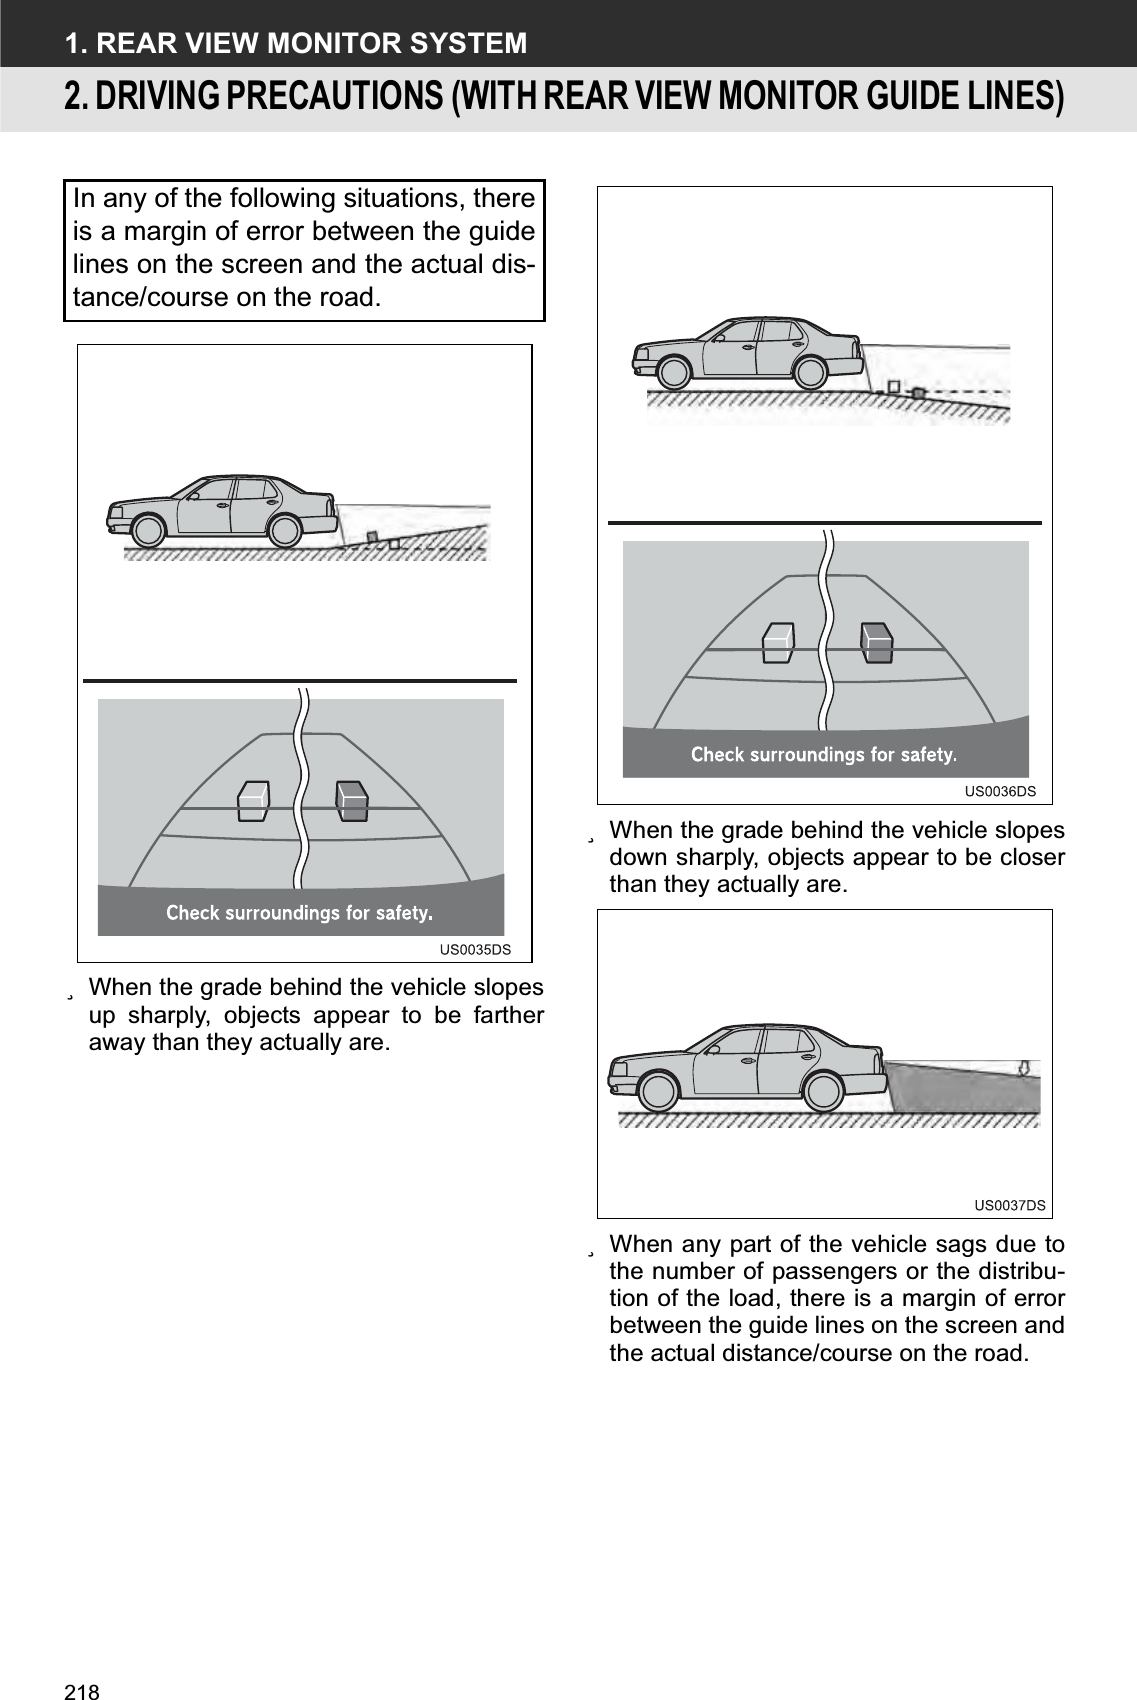 2181. REAR VIEW MONITOR SYSTEM2. DRIVING PRECAUTIONS (WITH REAR VIEW MONITOR GUIDE LINES)zWhen the grade behind the vehicle slopesup sharply, objects appear to be fartheraway than they actually are.zWhen the grade behind the vehicle slopesdown sharply, objects appear to be closerthan they actually are.zWhen any part of the vehicle sags due tothe number of passengers or the distribu-tion of the load, there is a margin of errorbetween the guide lines on the screen andthe actual distance/course on the road.In any of the following situations, thereis a margin of error between the guidelines on the screen and the actual dis-tance/course on the road.